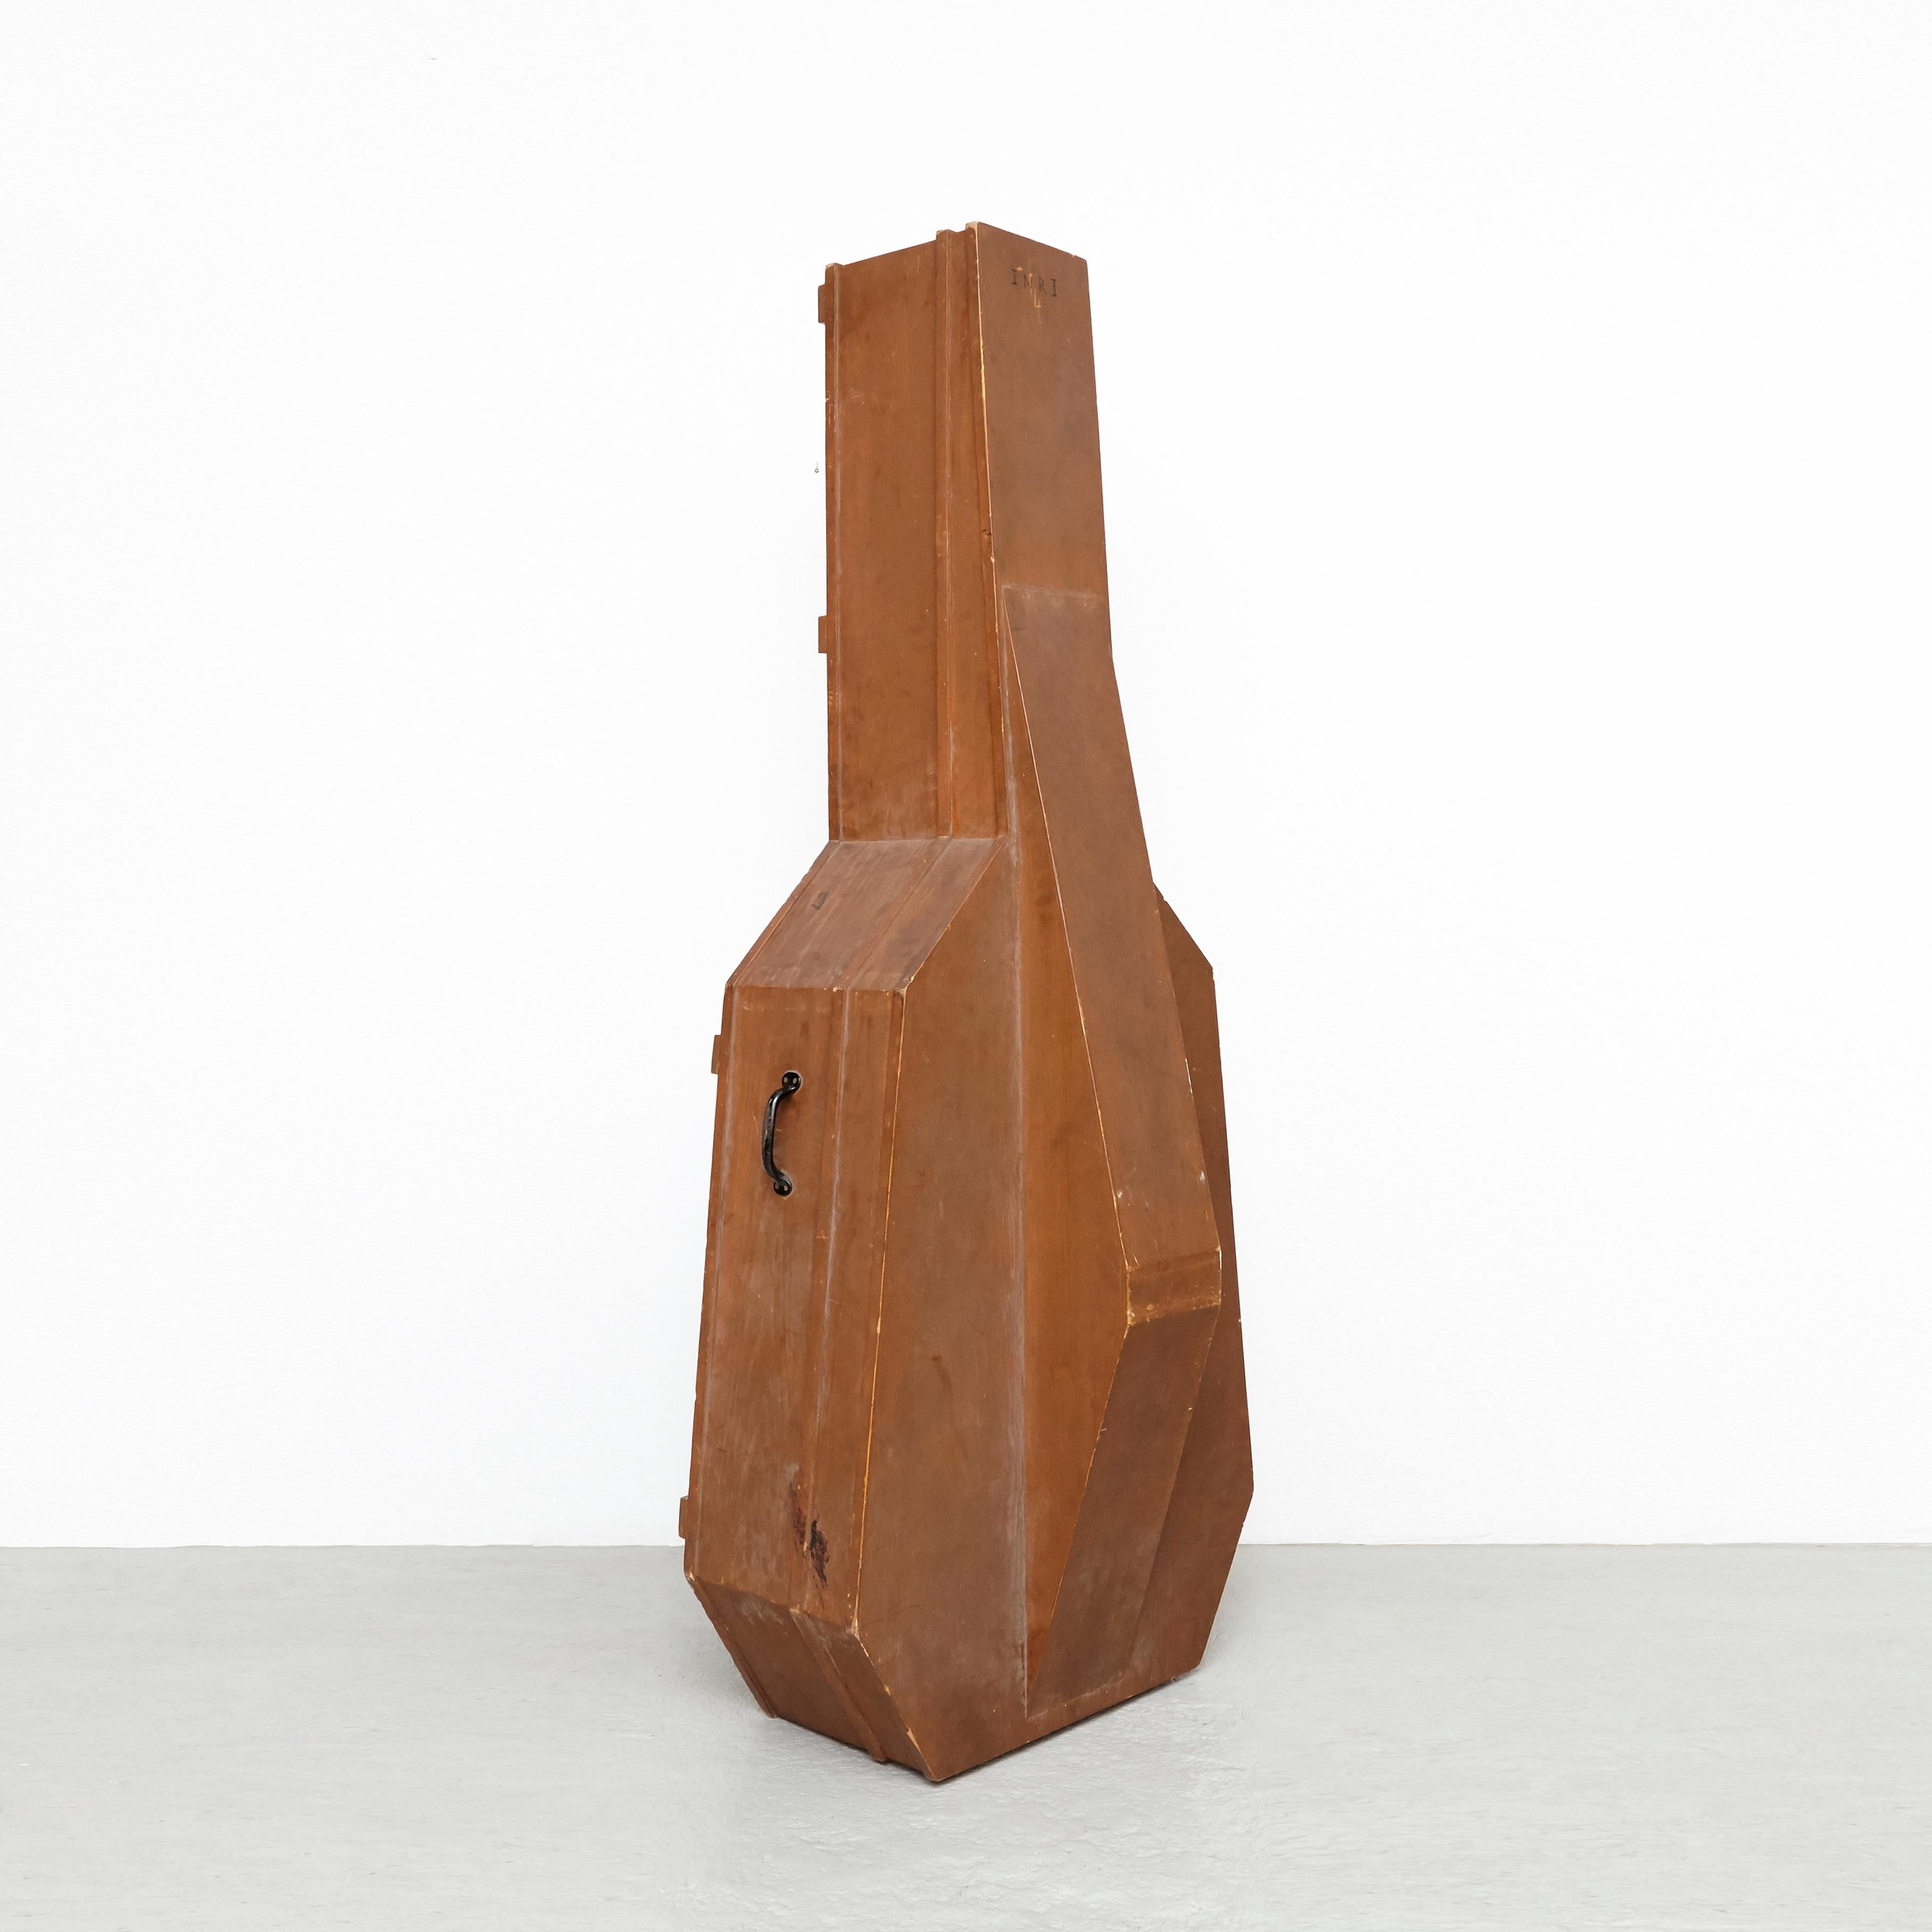 INRI, 2017
Wood, Metal
Measures: 80 7/10 × 32 7/10 × 21 3/10 in
205 × 83 × 54 cm

Intervened bouble bass case from the 40'
made in Berlin in 2017.

     